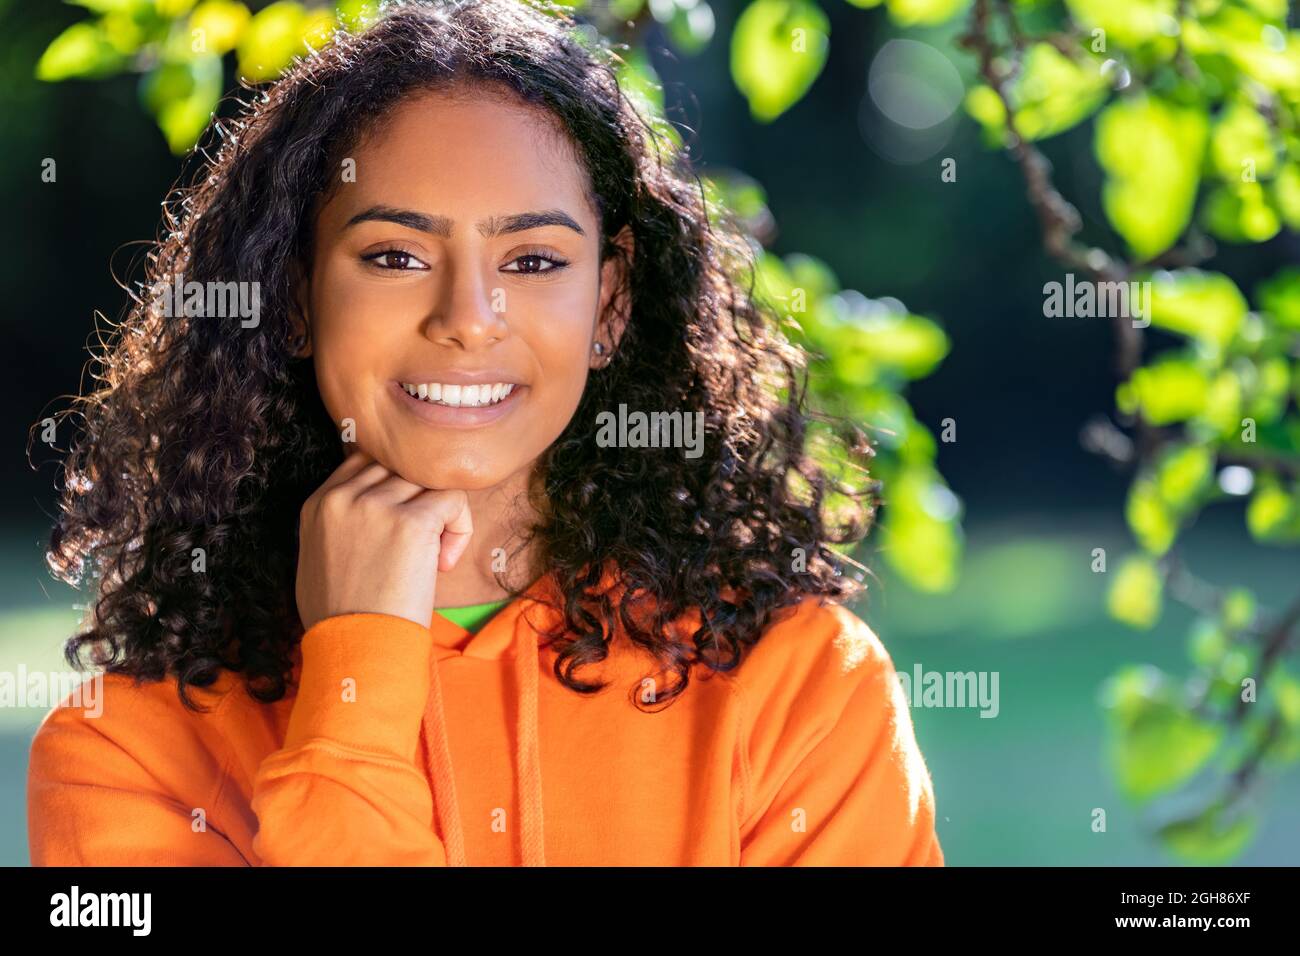 Outdoor portrait of beautiful happy mixed race African American girl teenager female young woman thinking and smiling with perfect teeth with a natura Stock Photo